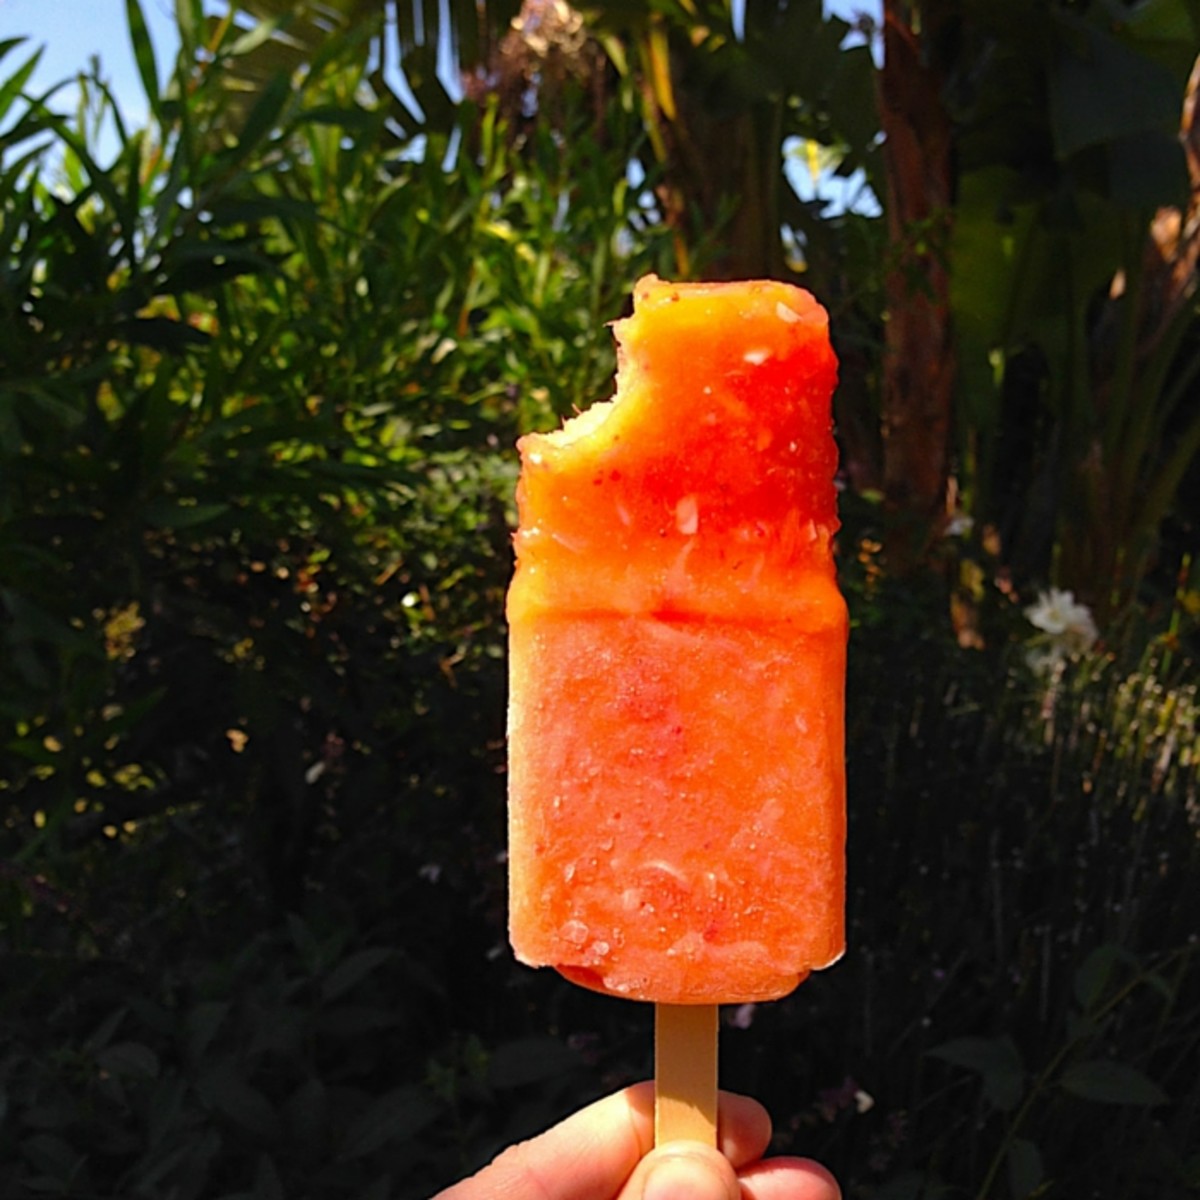 Wine-soaked popsicle